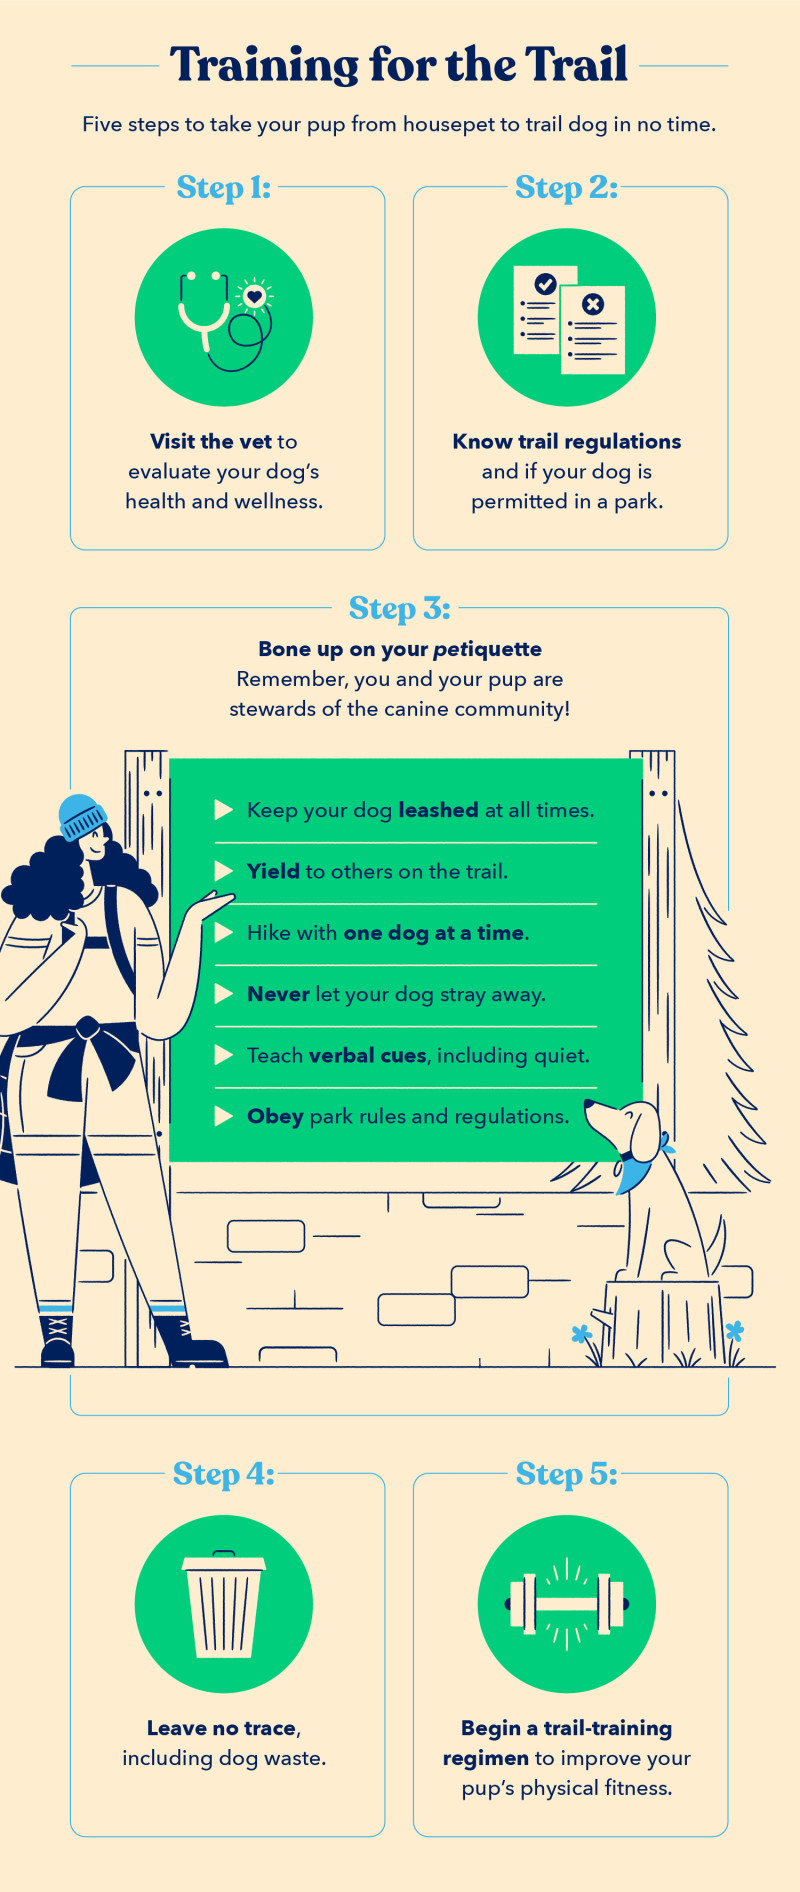 an illustration of five steps to take before going on a hike with a dog, including visiting the vet, knowing trail regulations, practicing obedience, leaving no trace, and training